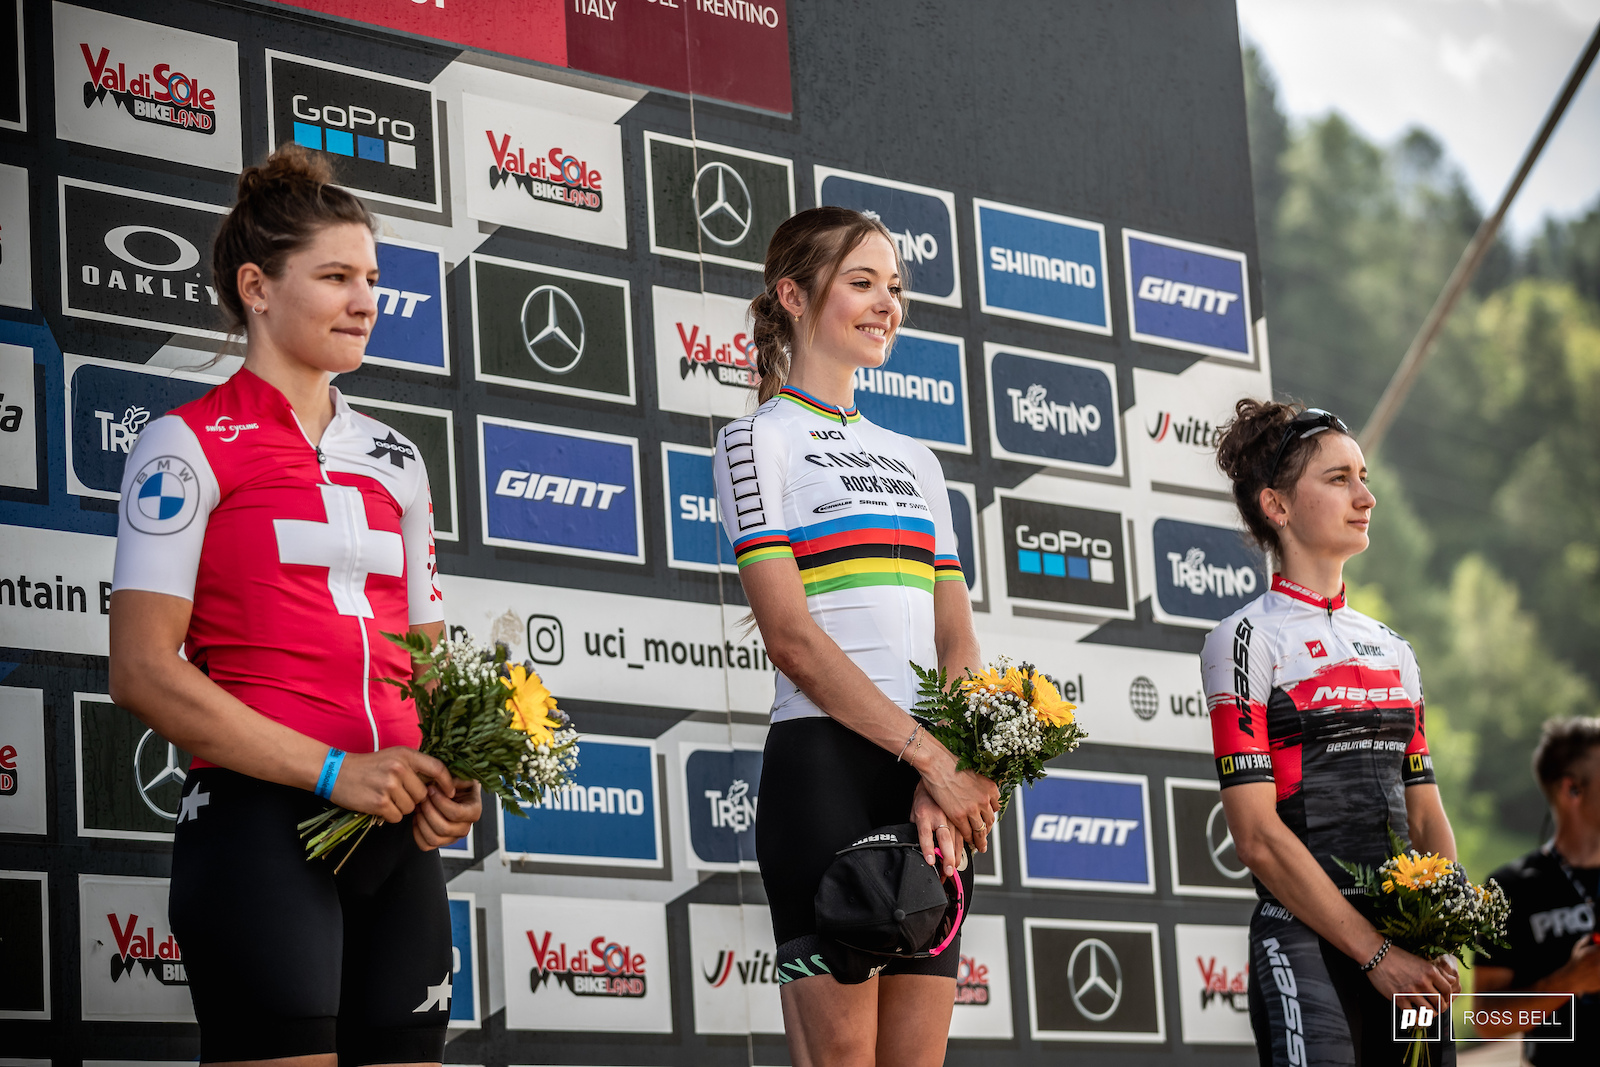 Line Burquier takes the win in front of Ronja Bl chlinger and Noemie Garnier.